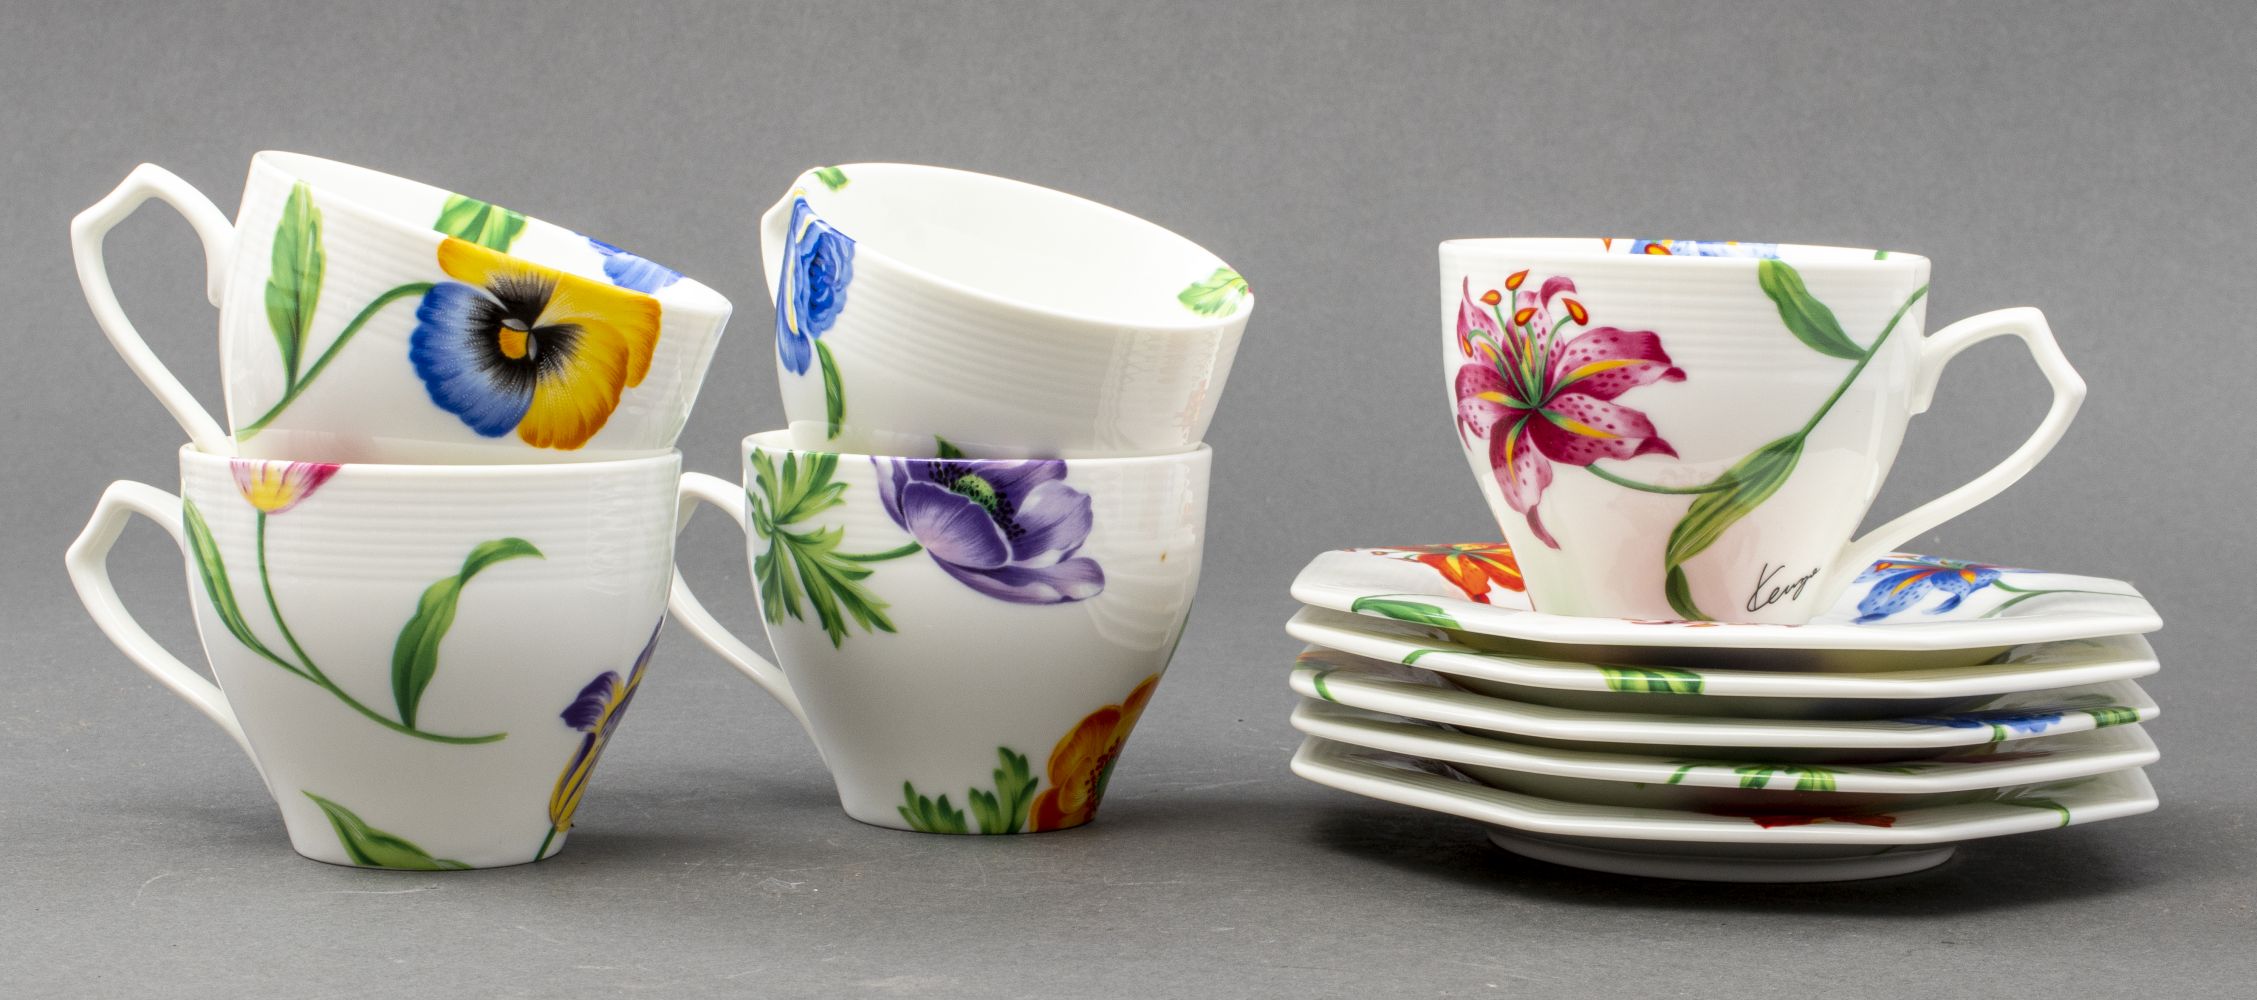 KENZO AITO FLORAL PORCELAIN CUPS